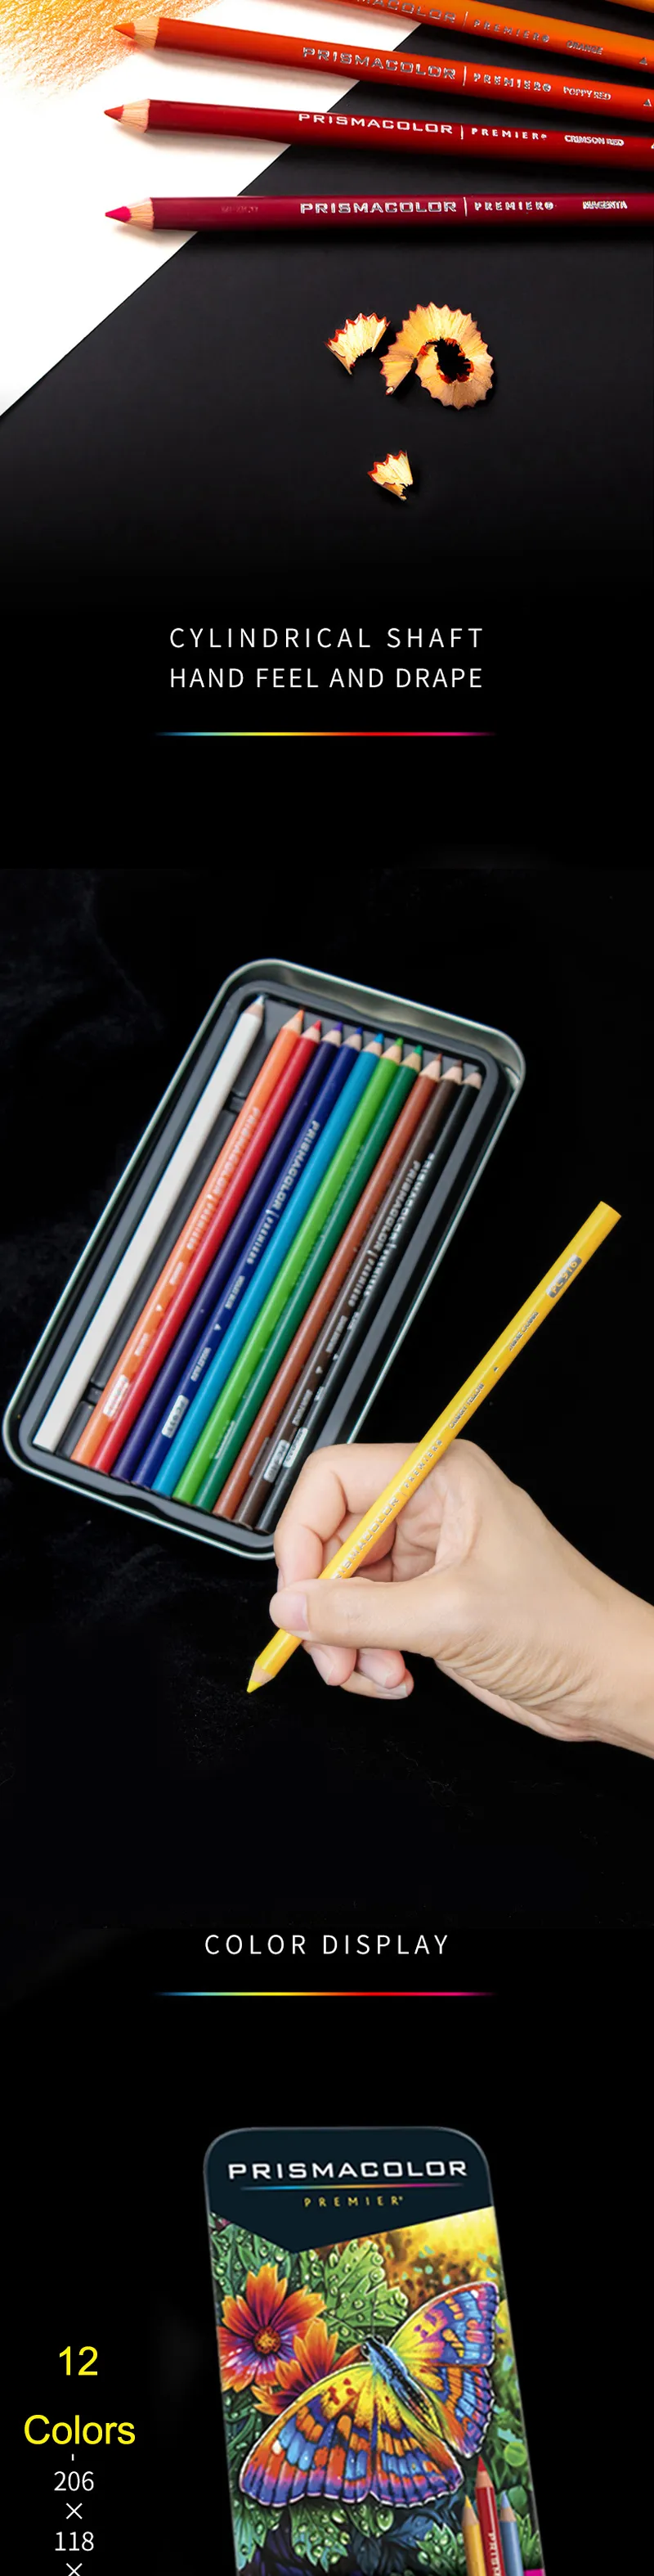 Wholesale Prismacolor Premier Prismacolor Premier Colored Pencils 36/72/For  Drawing, Sketching, And Coloring Adult Art Supplies In Tin Box Original  From Dao09, $92.9